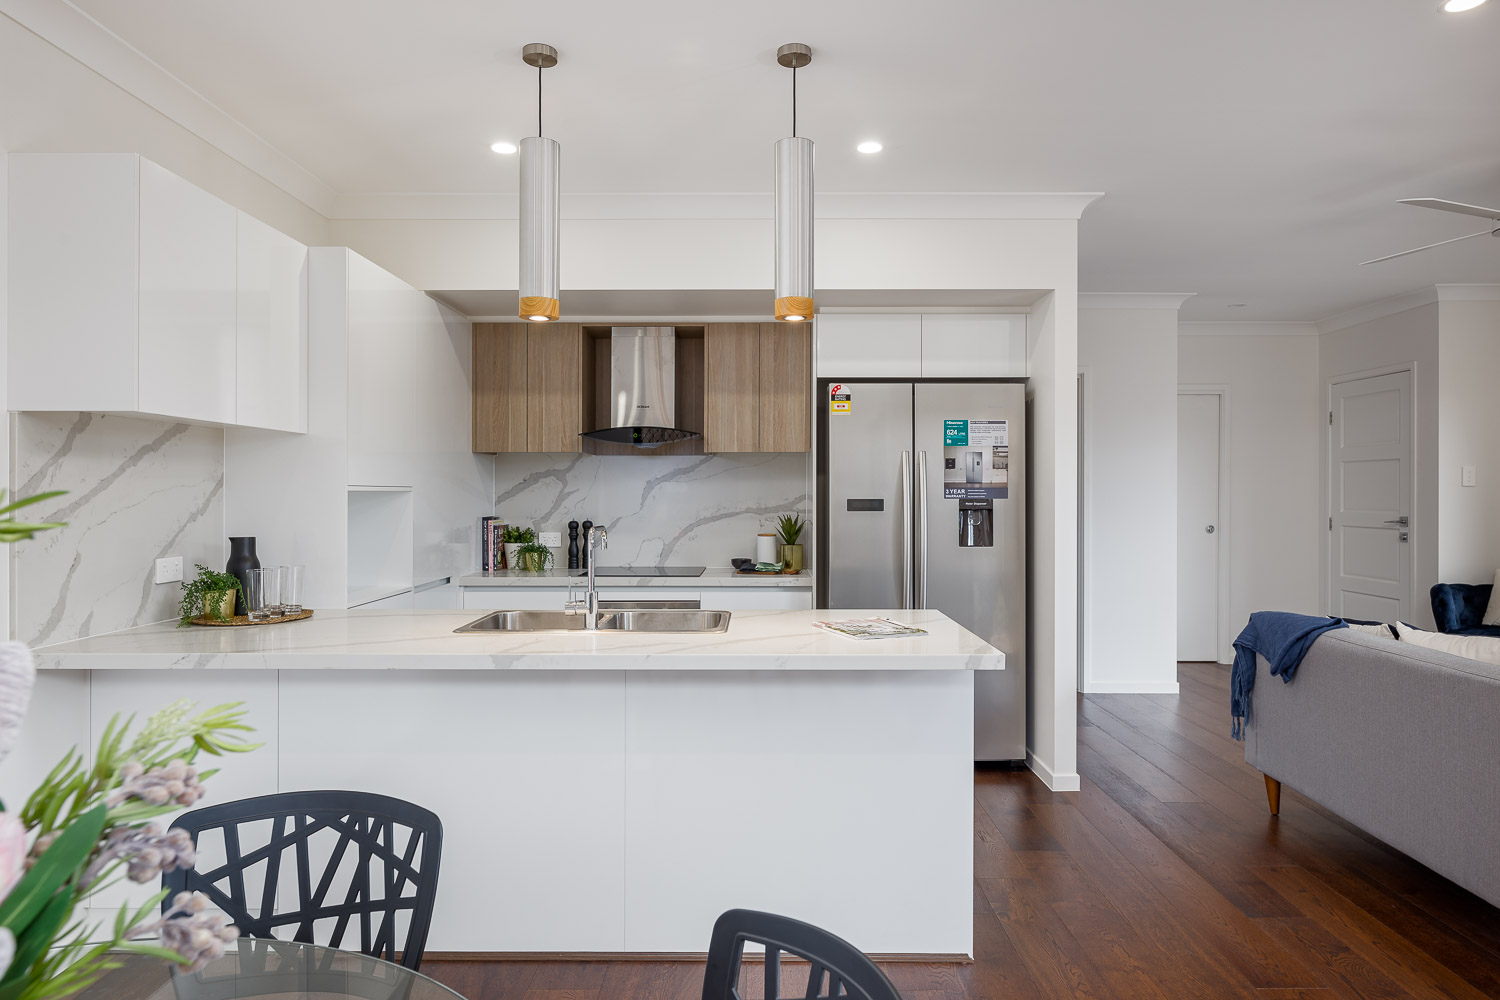 Parc Townhomes Kitchen (image supplied by the developer)